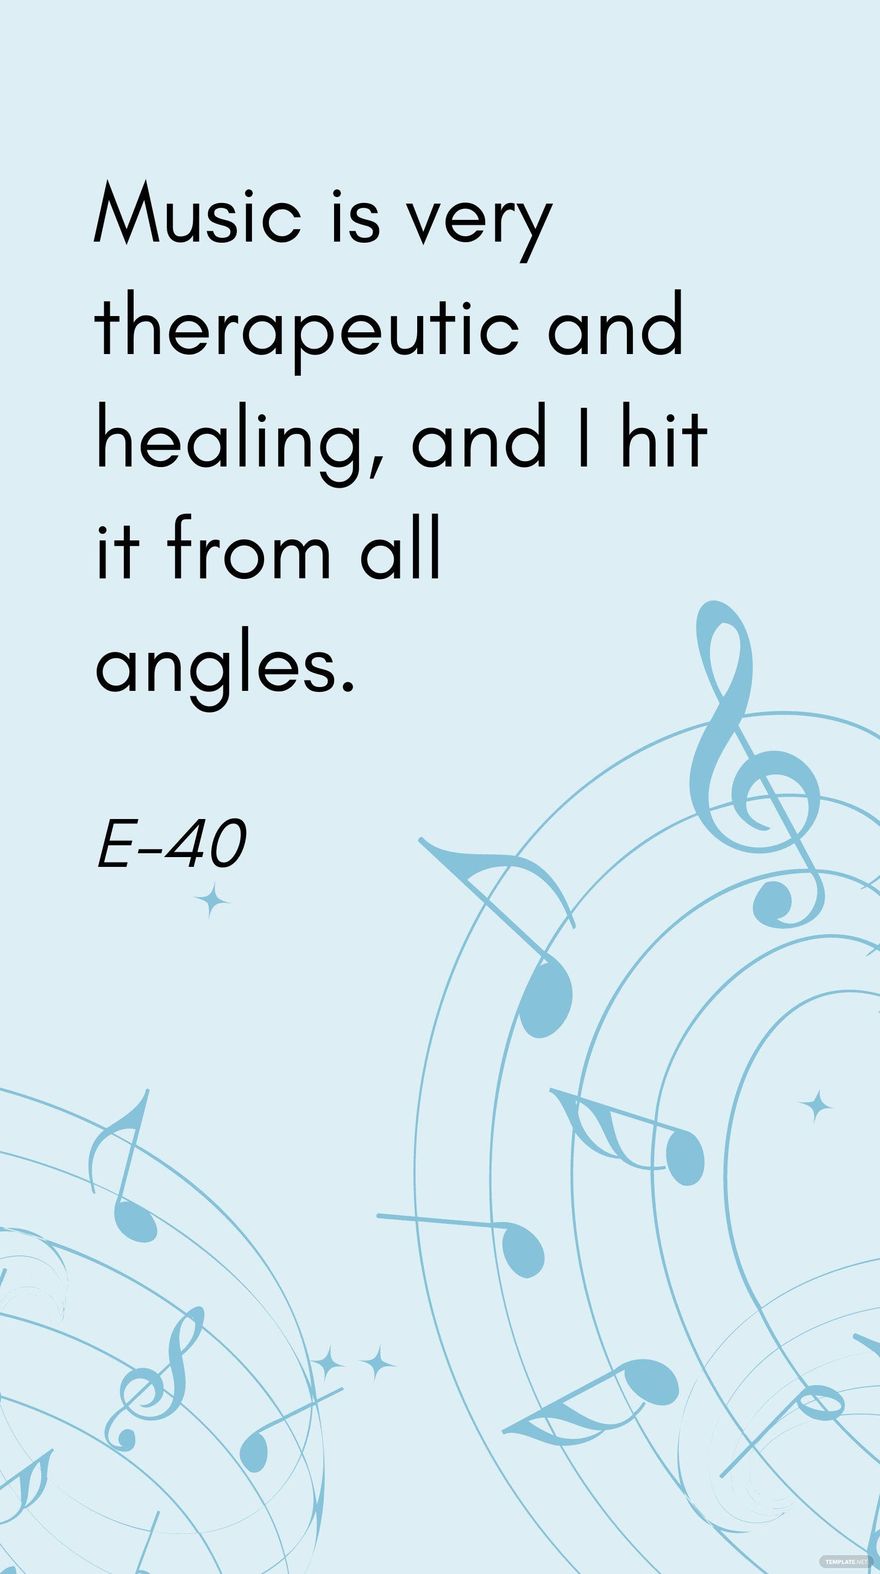 Free E-40 - Music is very therapeutic and healing, and I hit it from all angles. in JPG